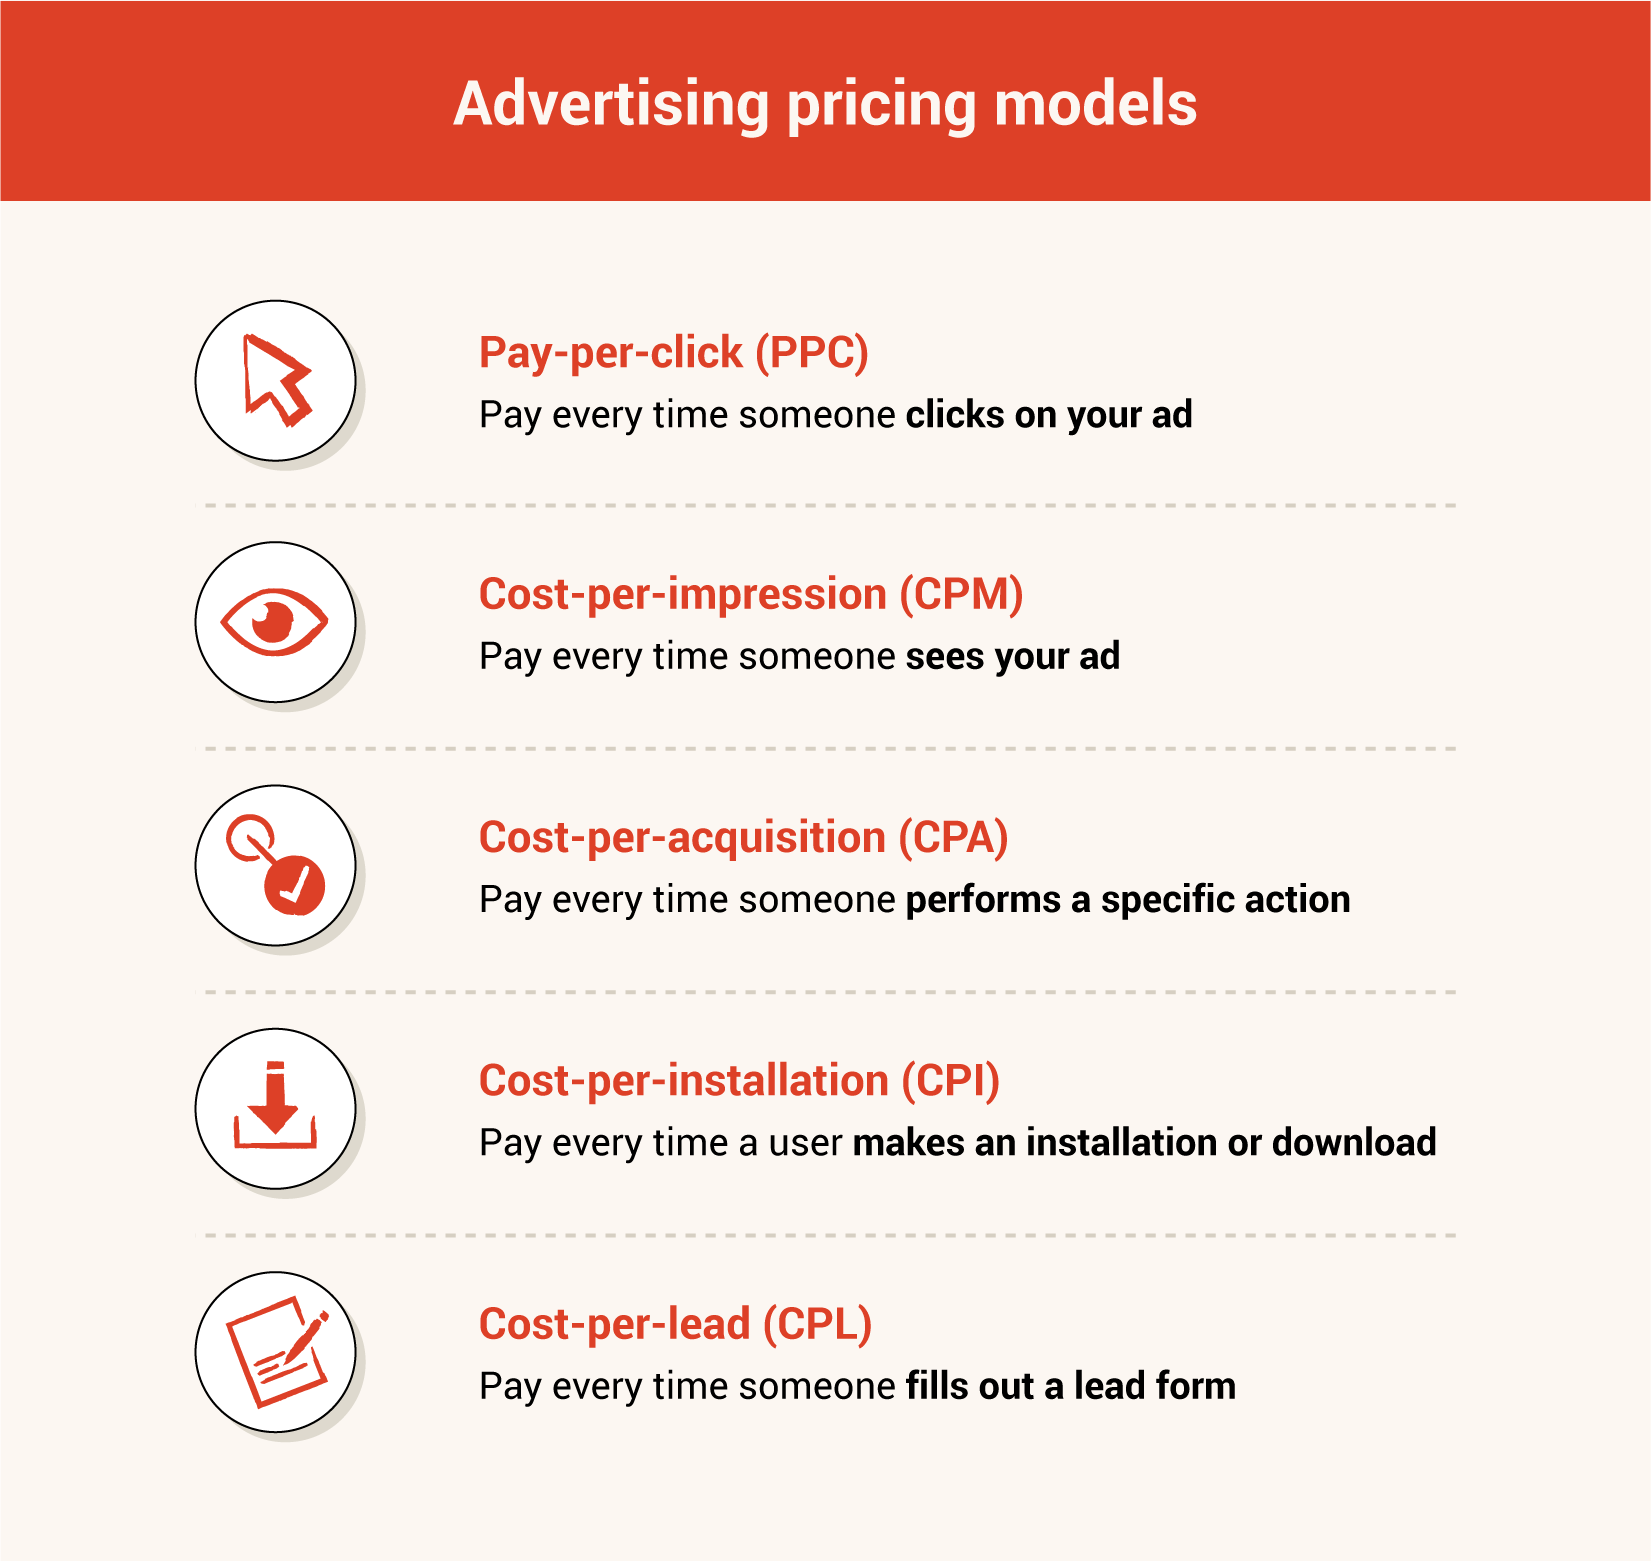 Advertising pricing models infographic